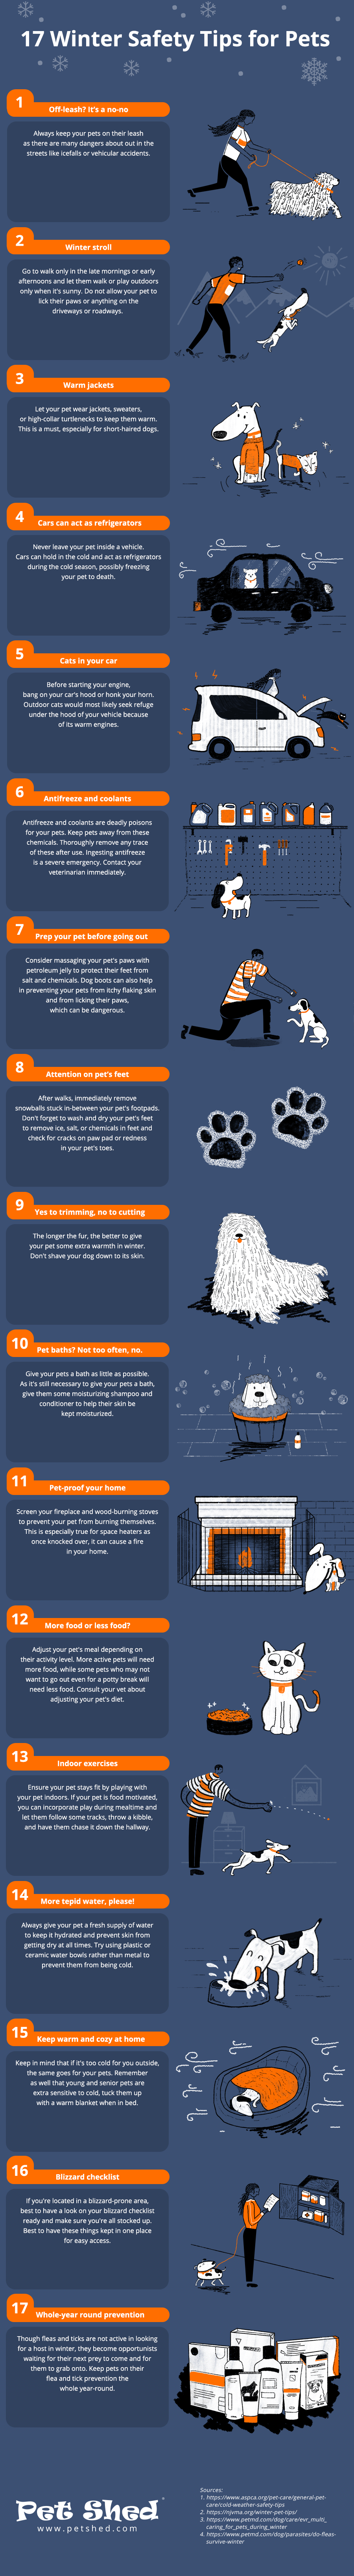 Tips for a Safe Fall Season - Infographic